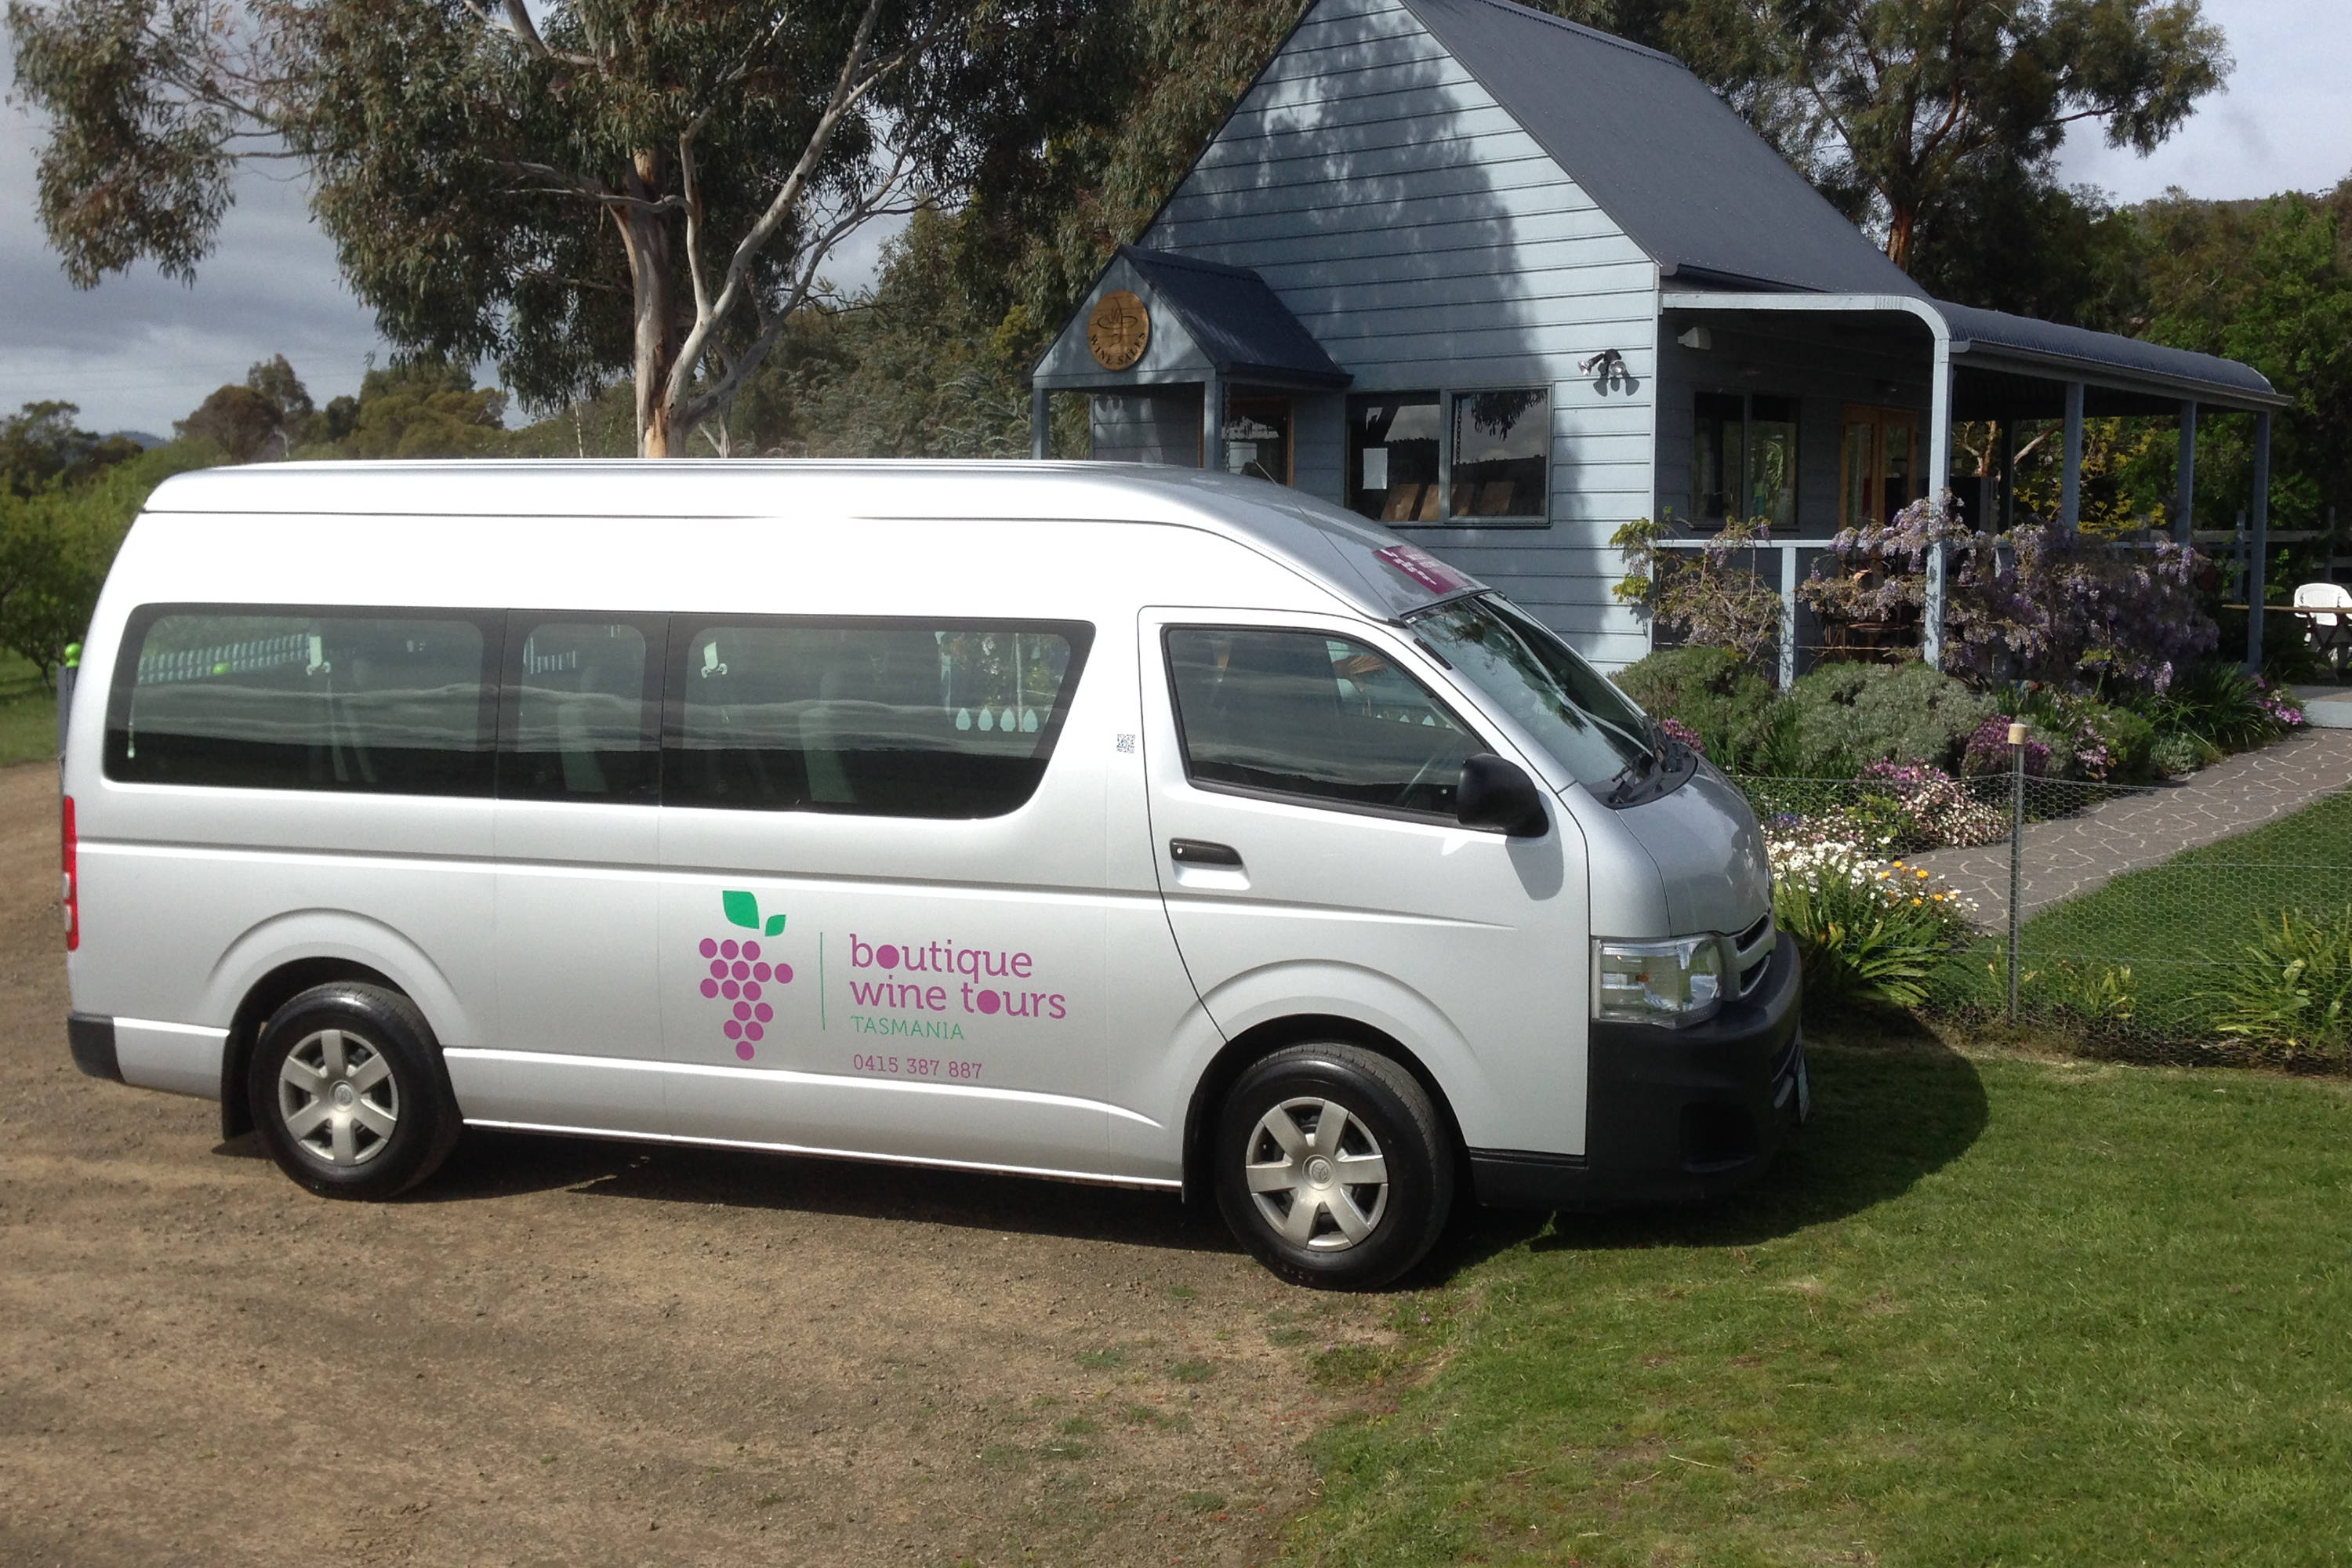 The silver Boutique Wine Tours Tasmania van with the logo on the side in purple and green.